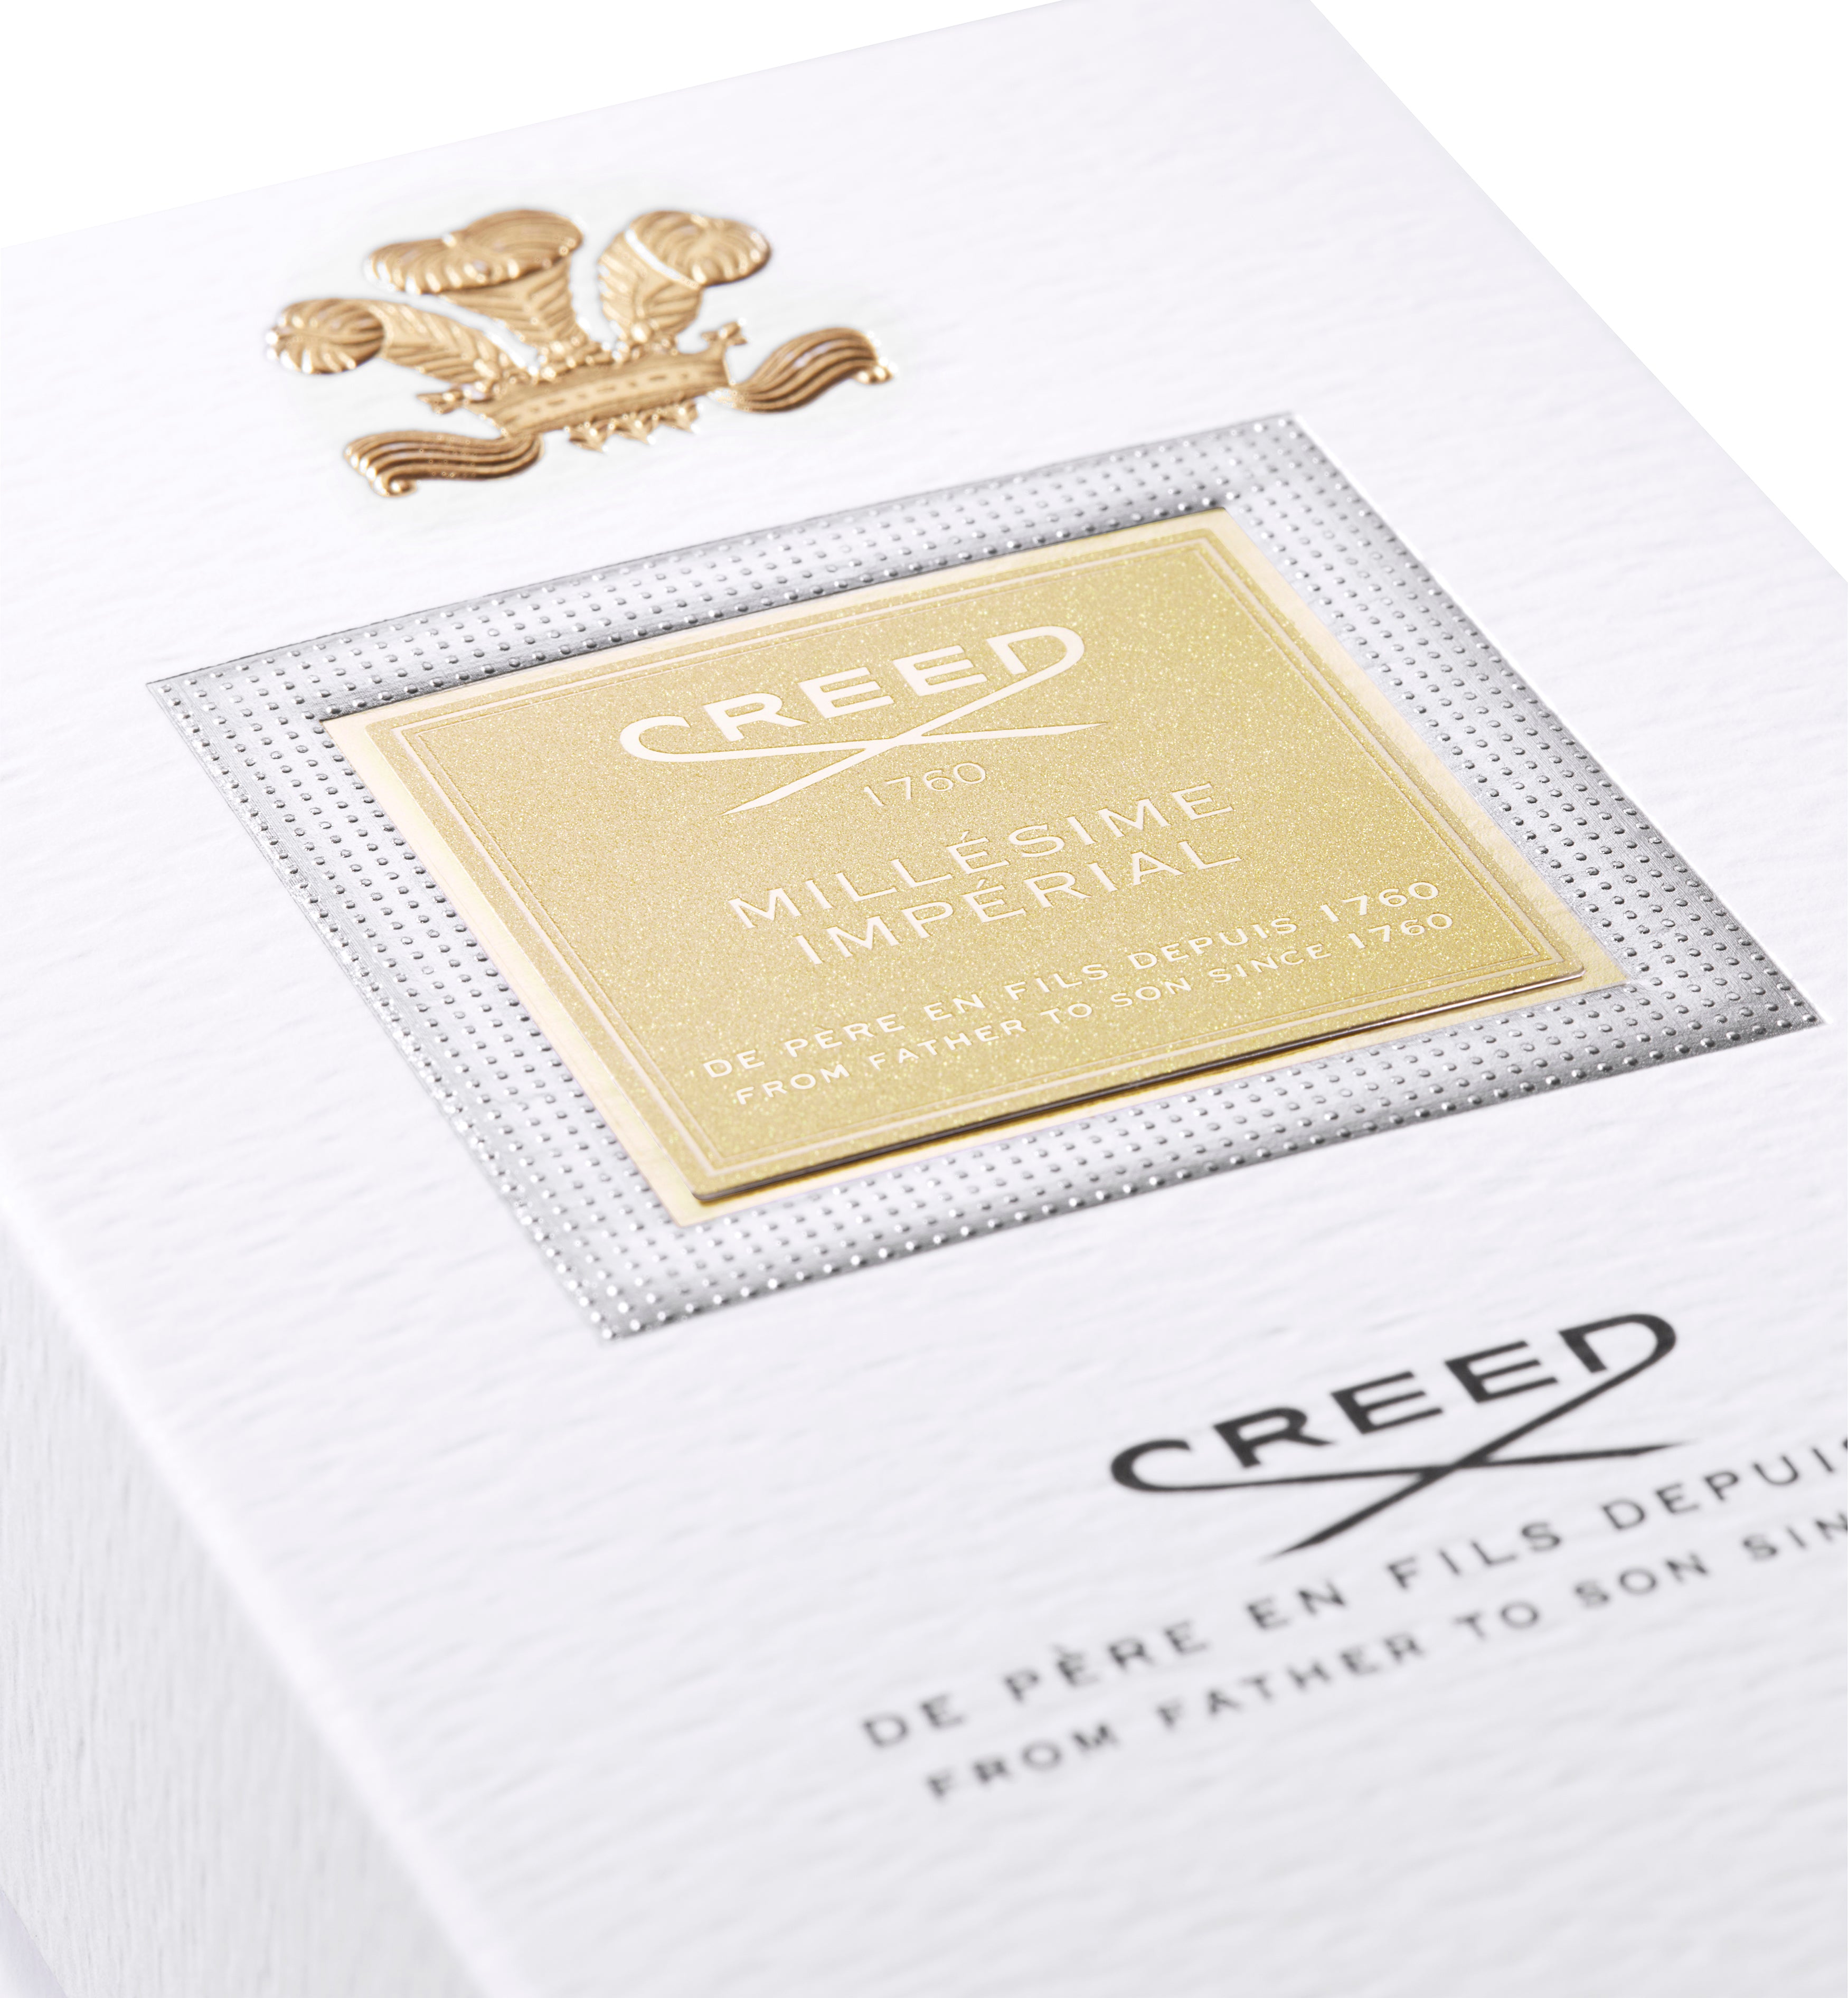 CREED Millesime Imperial 100ml